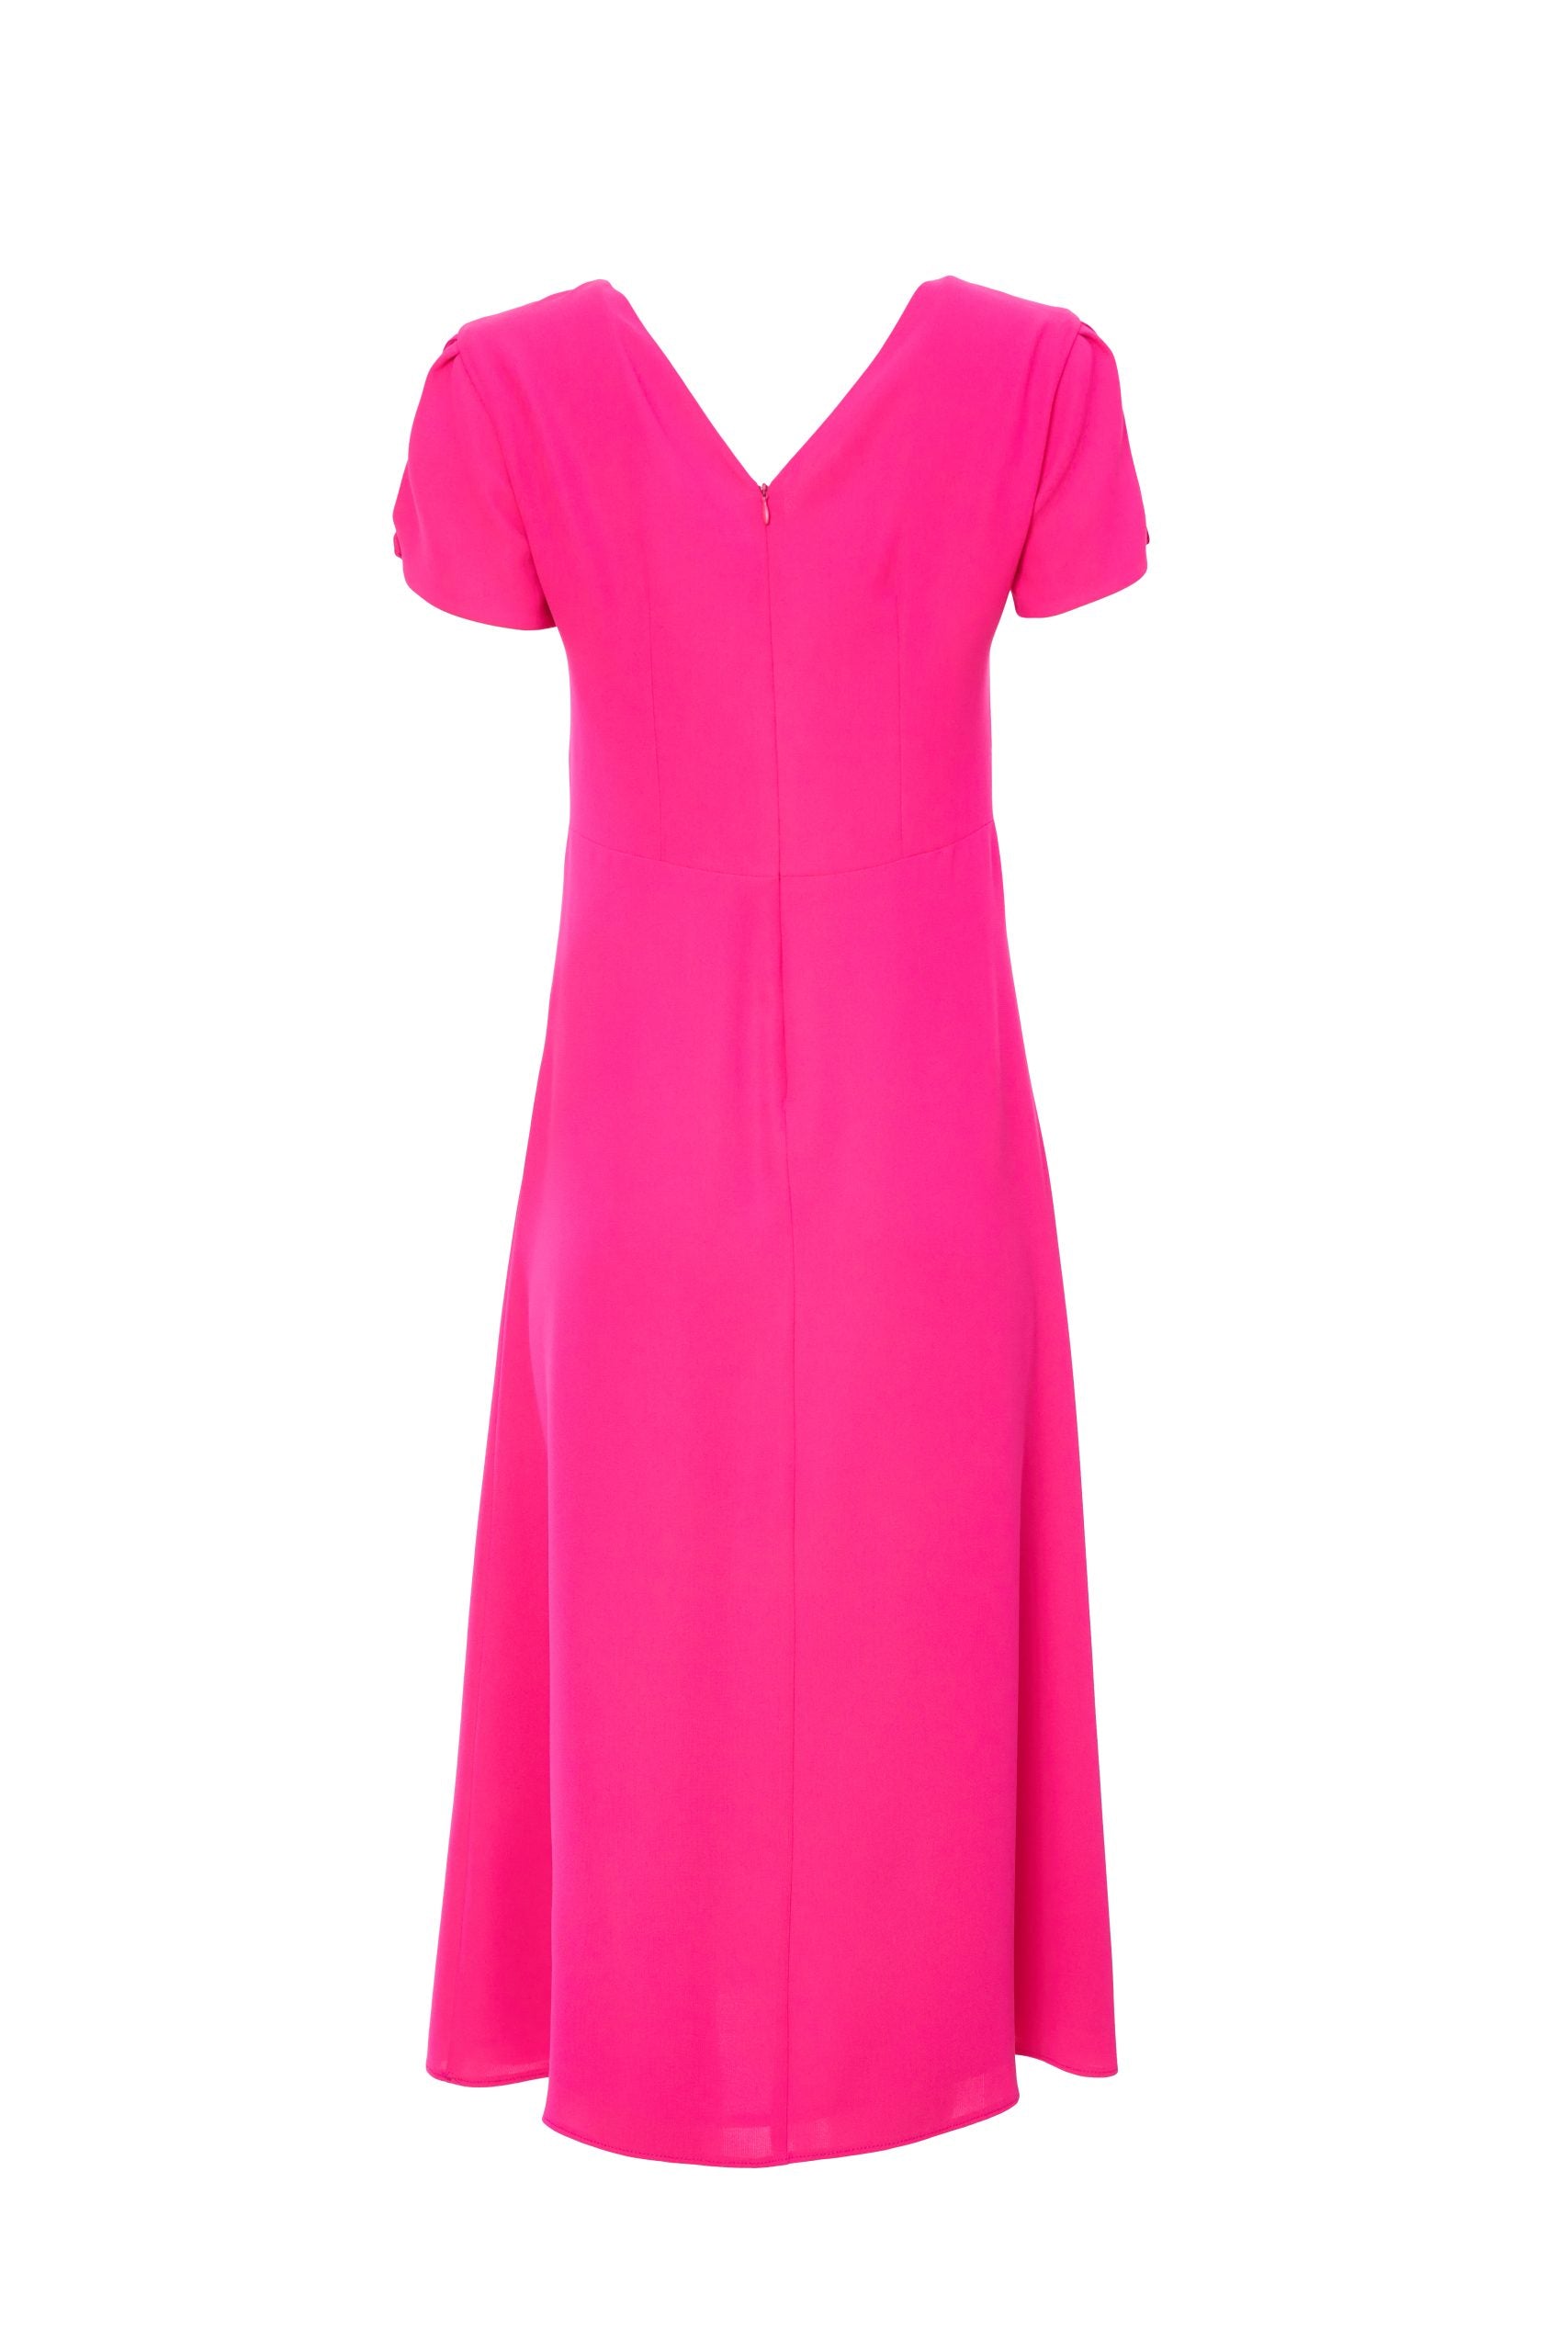 V-Neck Gathered Dress in Water Melon Pink